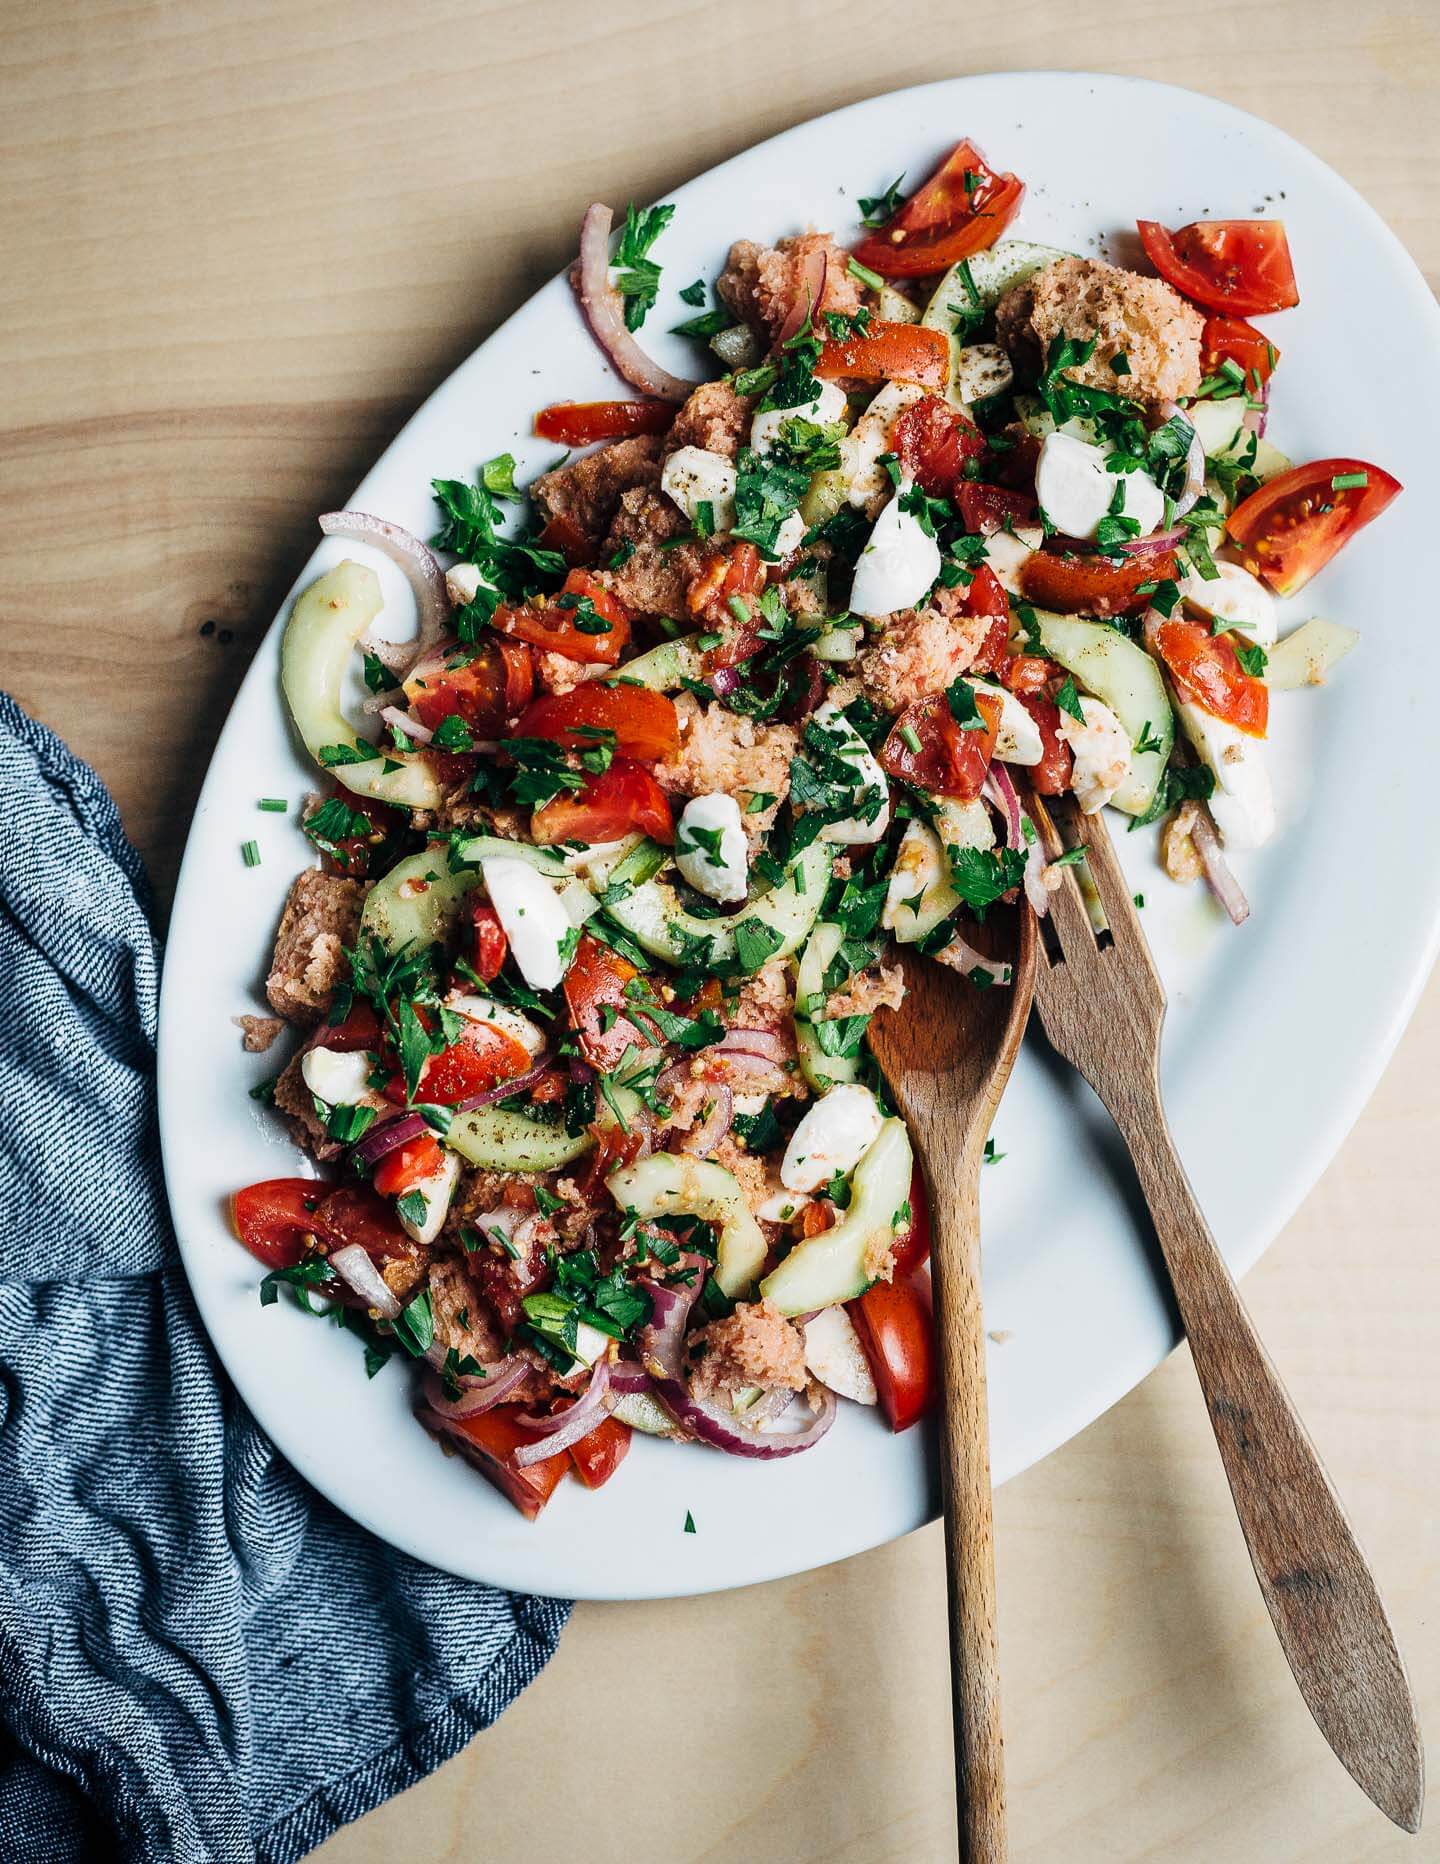 A classic summer salad, this panzanella with mozzarella and herbs features perfectly ripe summer tomatoes, a punchy garlic and anchovy vinaigrette.